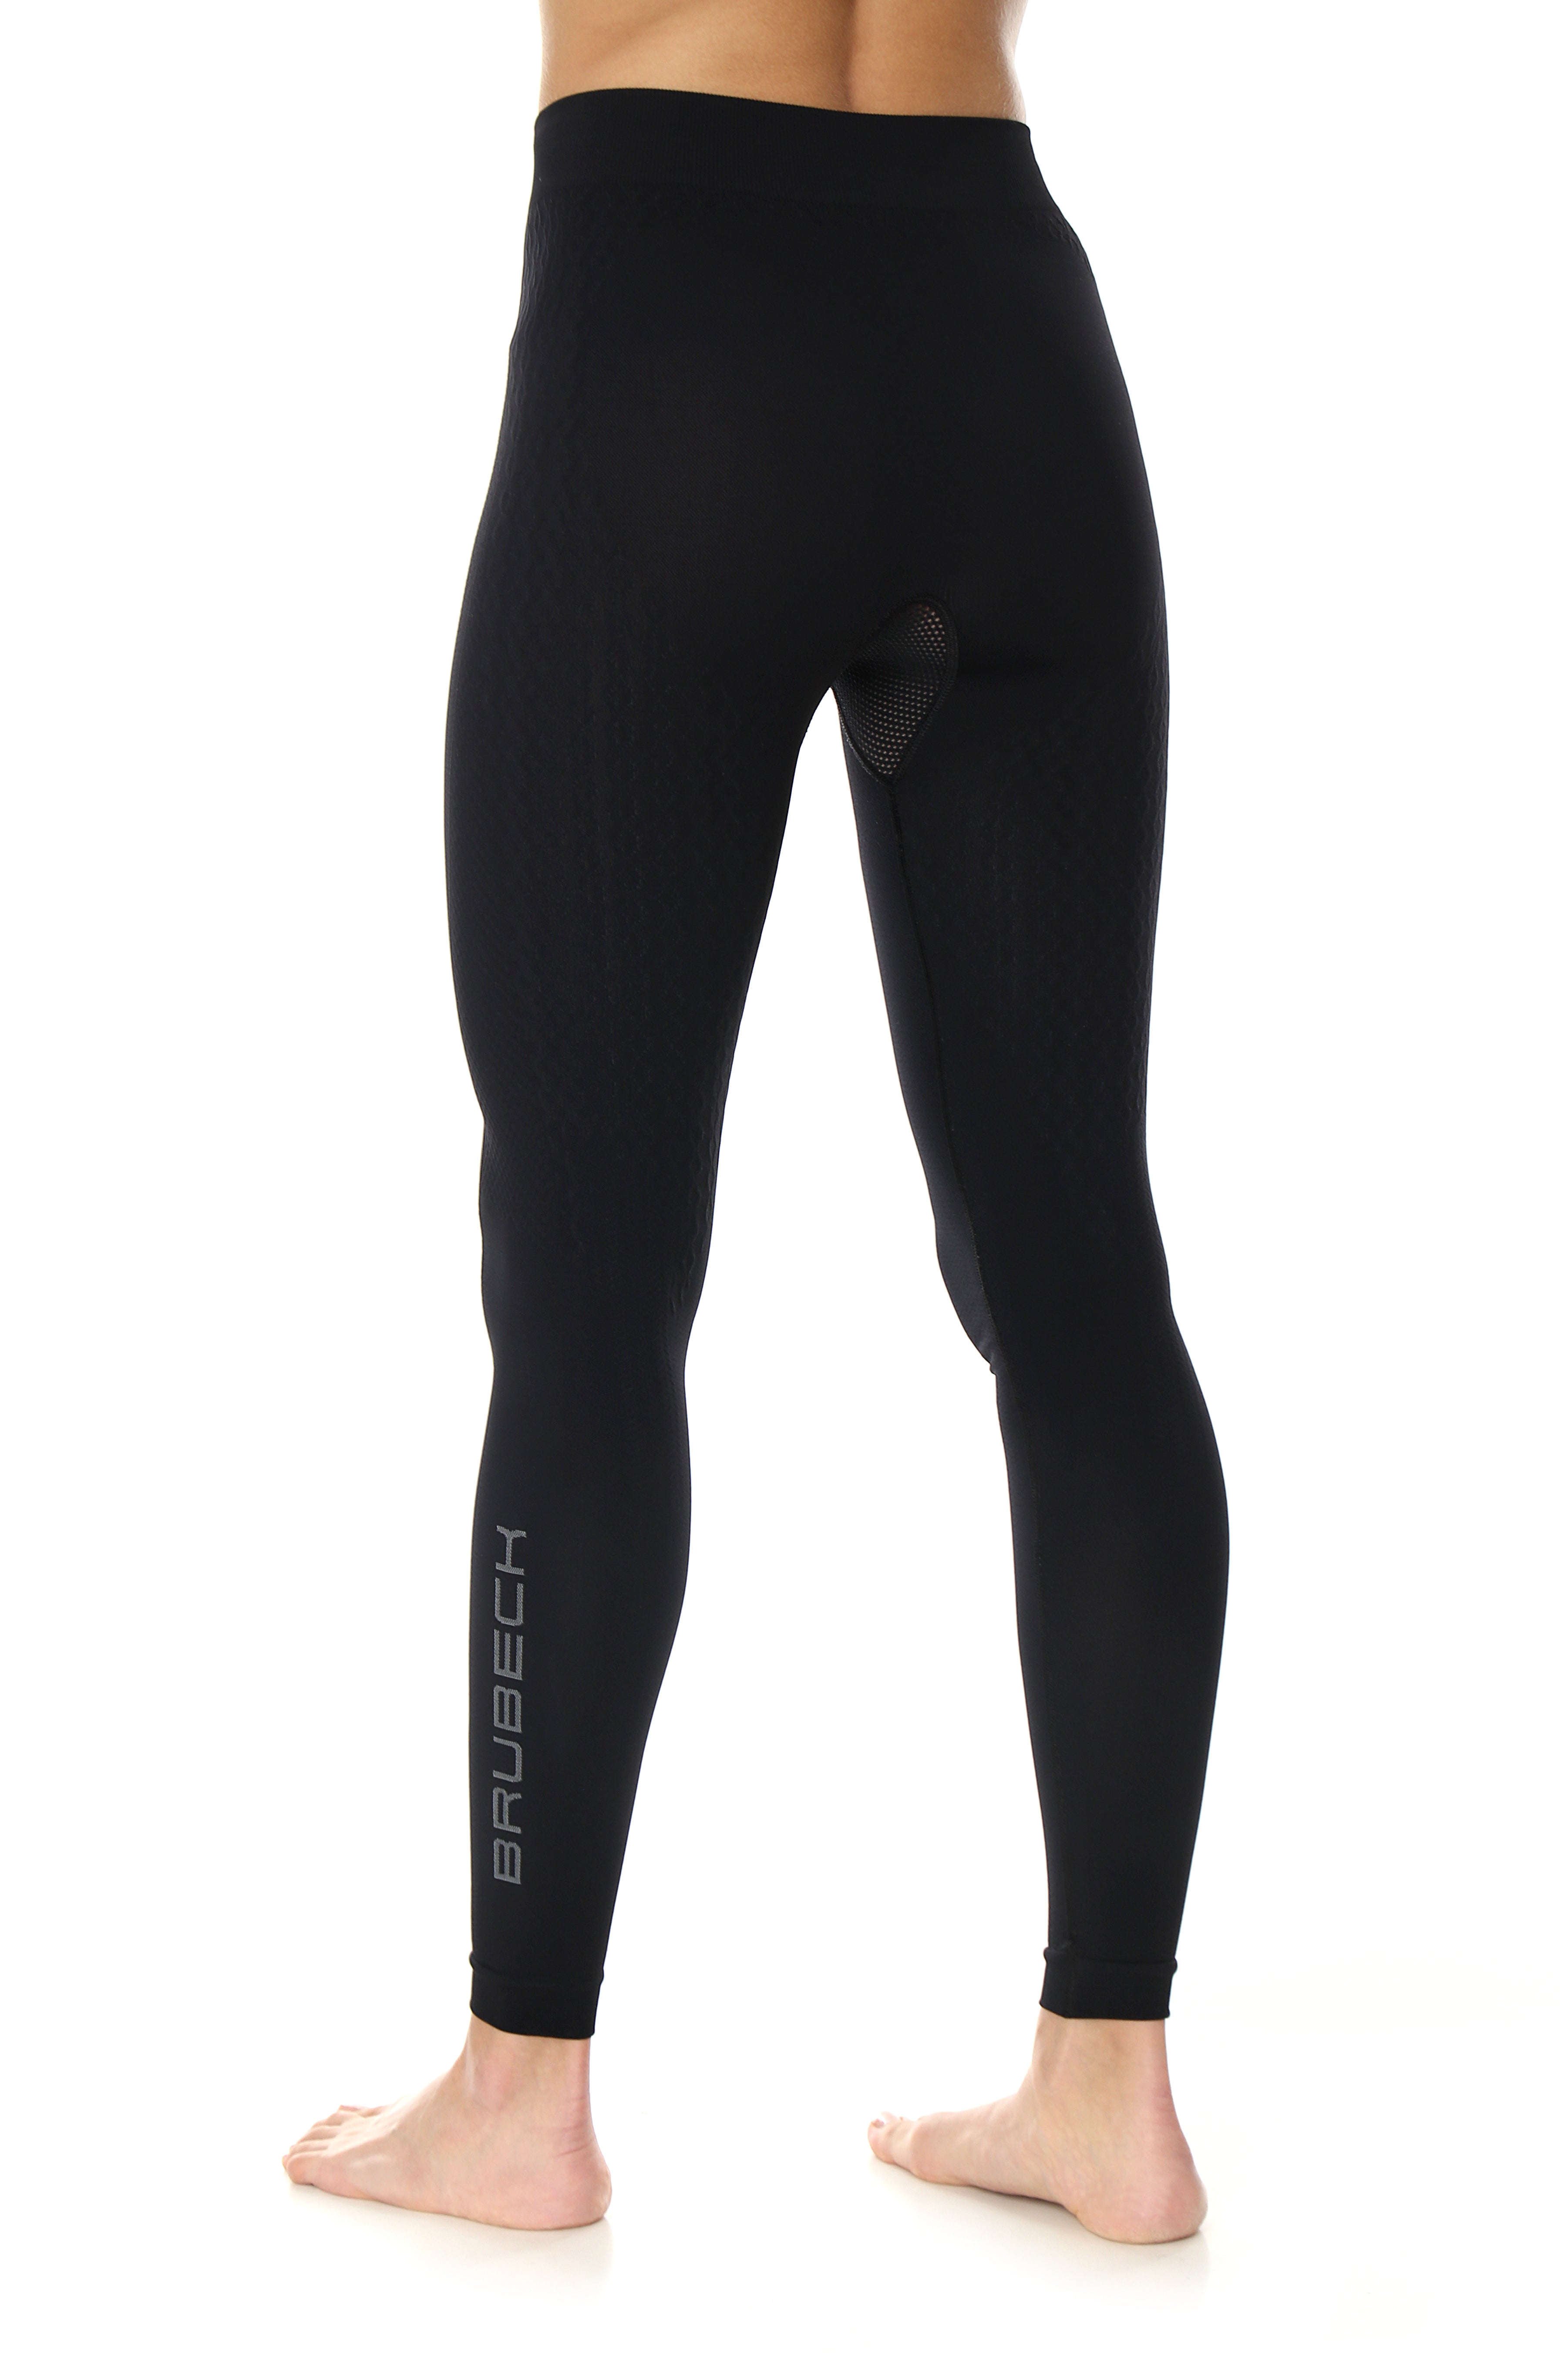 Women's Midweight Base Layer Extreme Thermo Pants